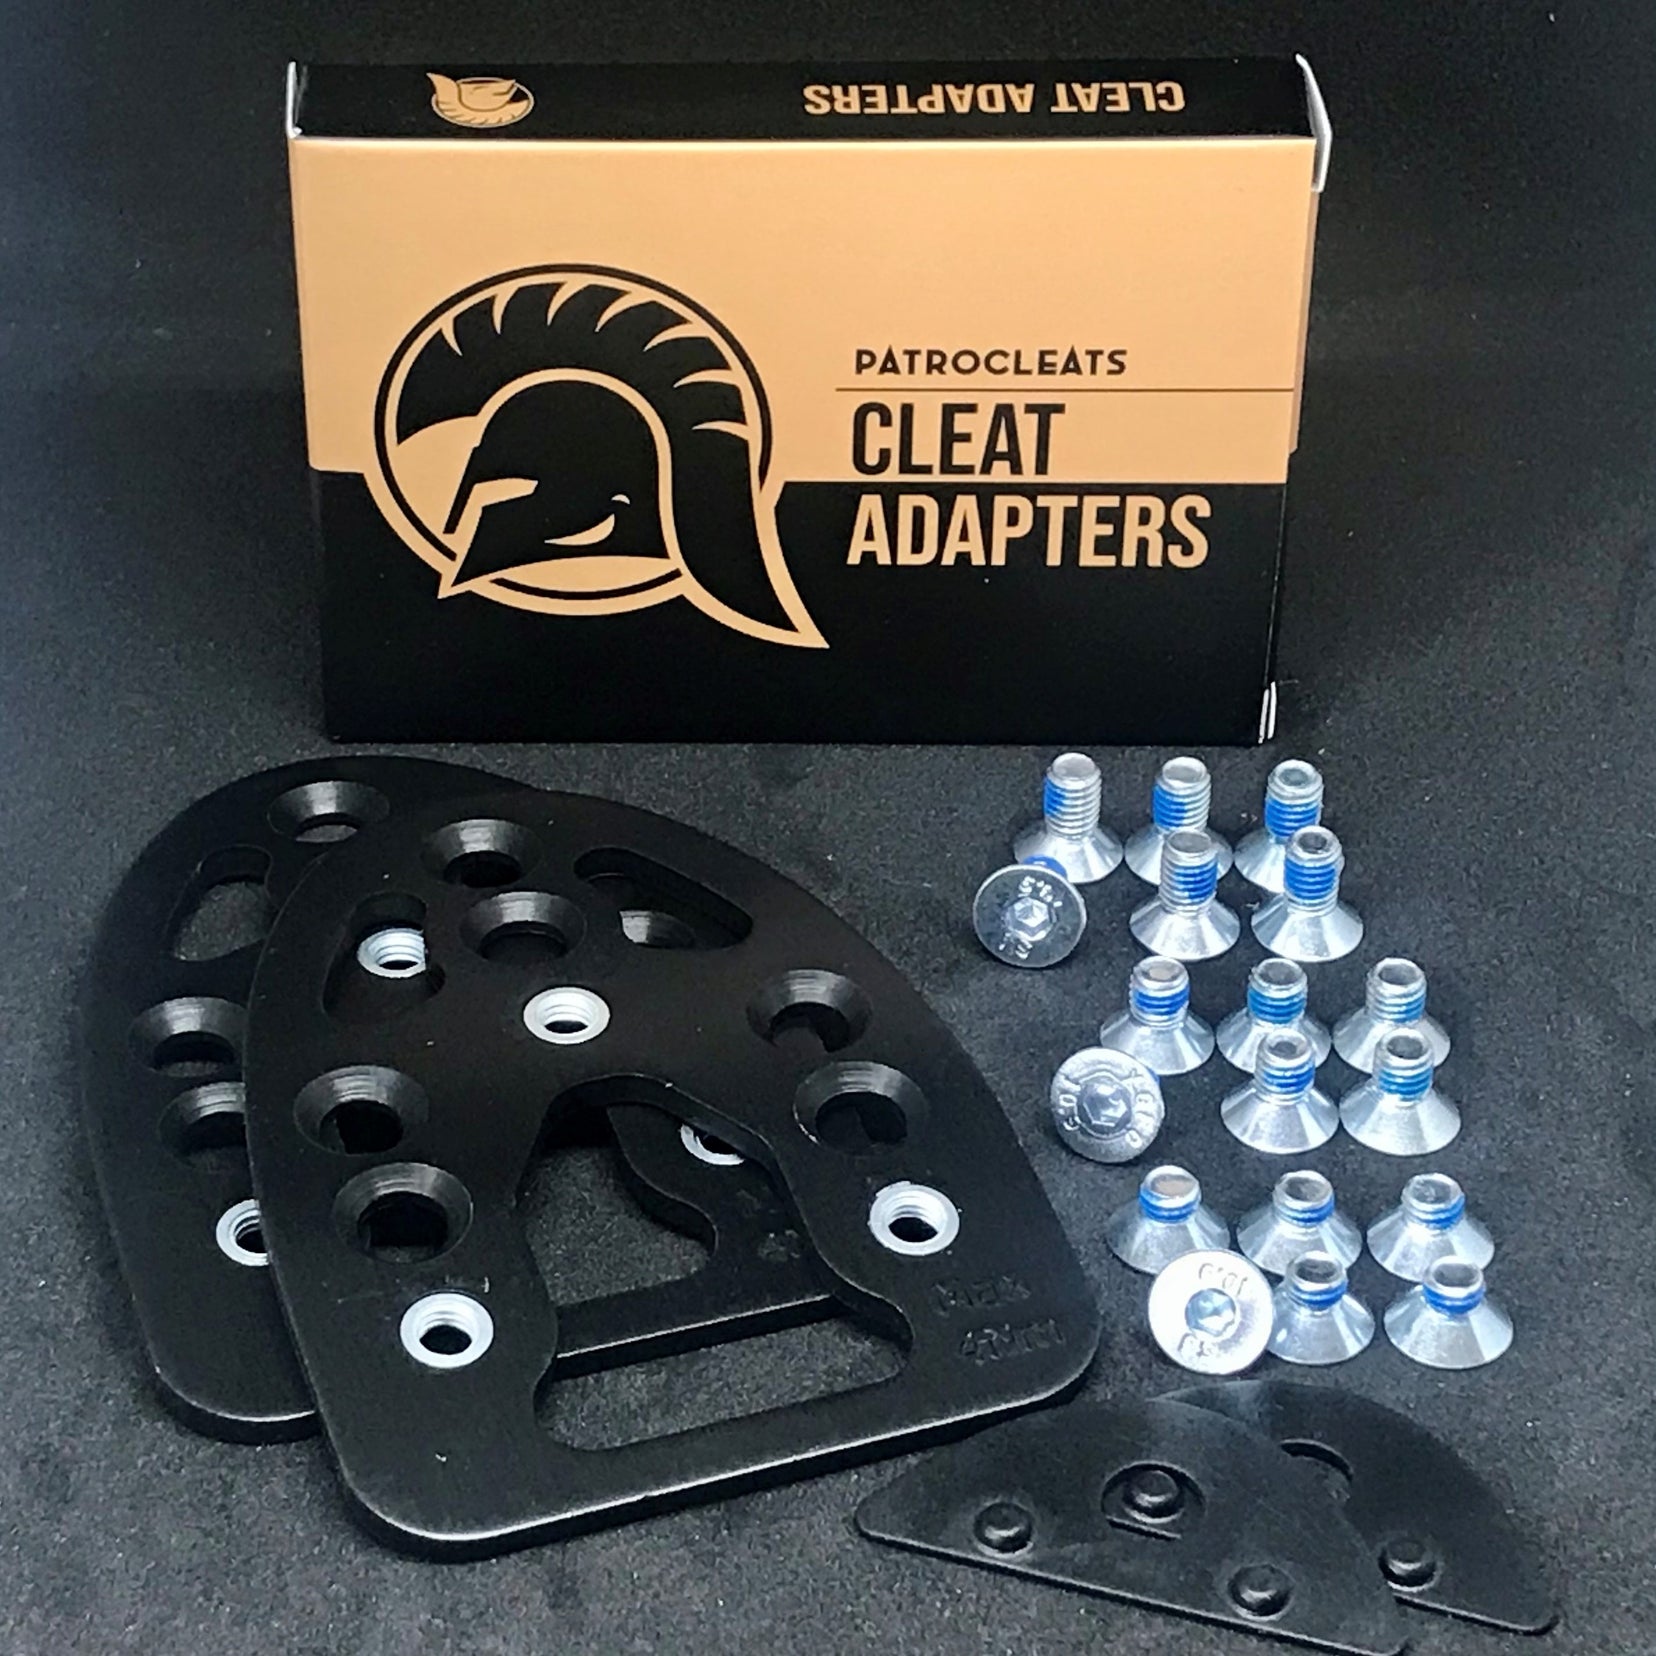 Cleat adapters for mortons neuroma, metatarsalgia, hot spots and other foot pain when cycling. Kit.